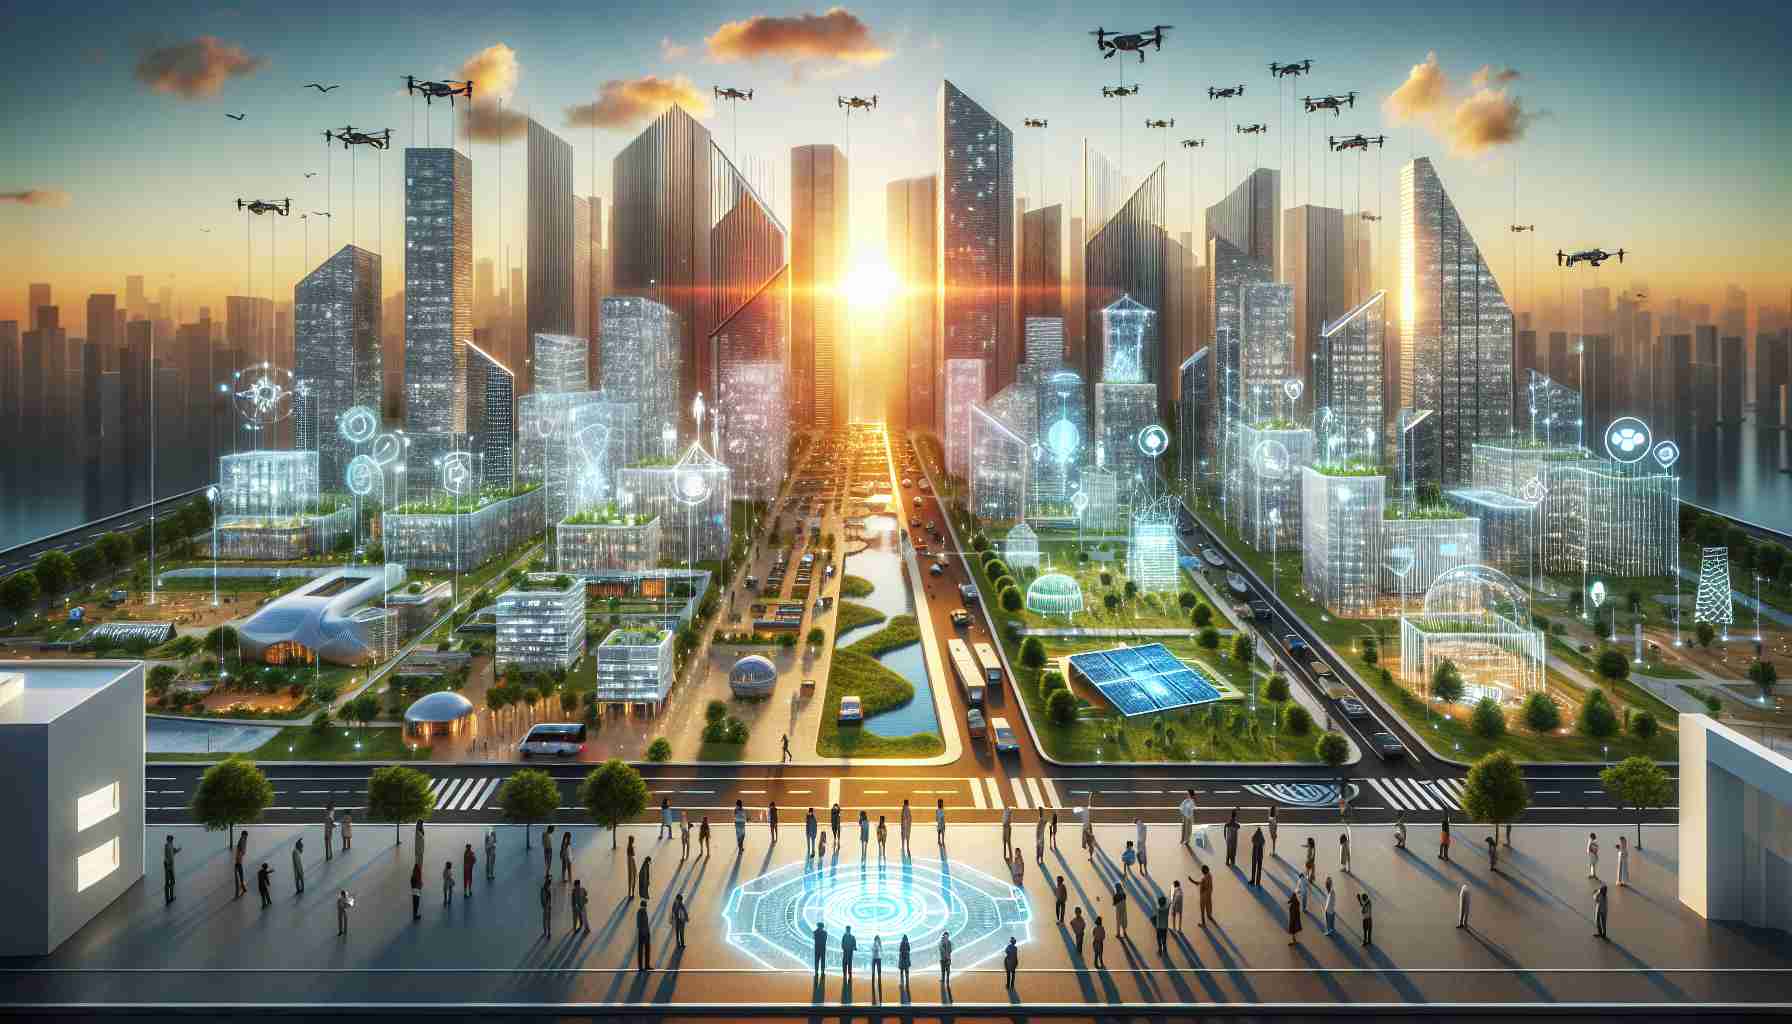 A high-definition, realistic image capturing the essence of 'Architecting Innovation: A Vision for the Future'. This would include an array of futuristic architecture designs in a vibrant cityscape. Buildings that incorporate sustainable materials, green spaces and solar panels. It could also feature diverse individuals of varying gender and descent engaging with innovative technologies, such as holographic blueprints and autonomous vehicles. The scene may be set against a backdrop of a clear sky with drones buzzing overhead. The setting sun could cast a warm glow, symbolizing the coming of the future.